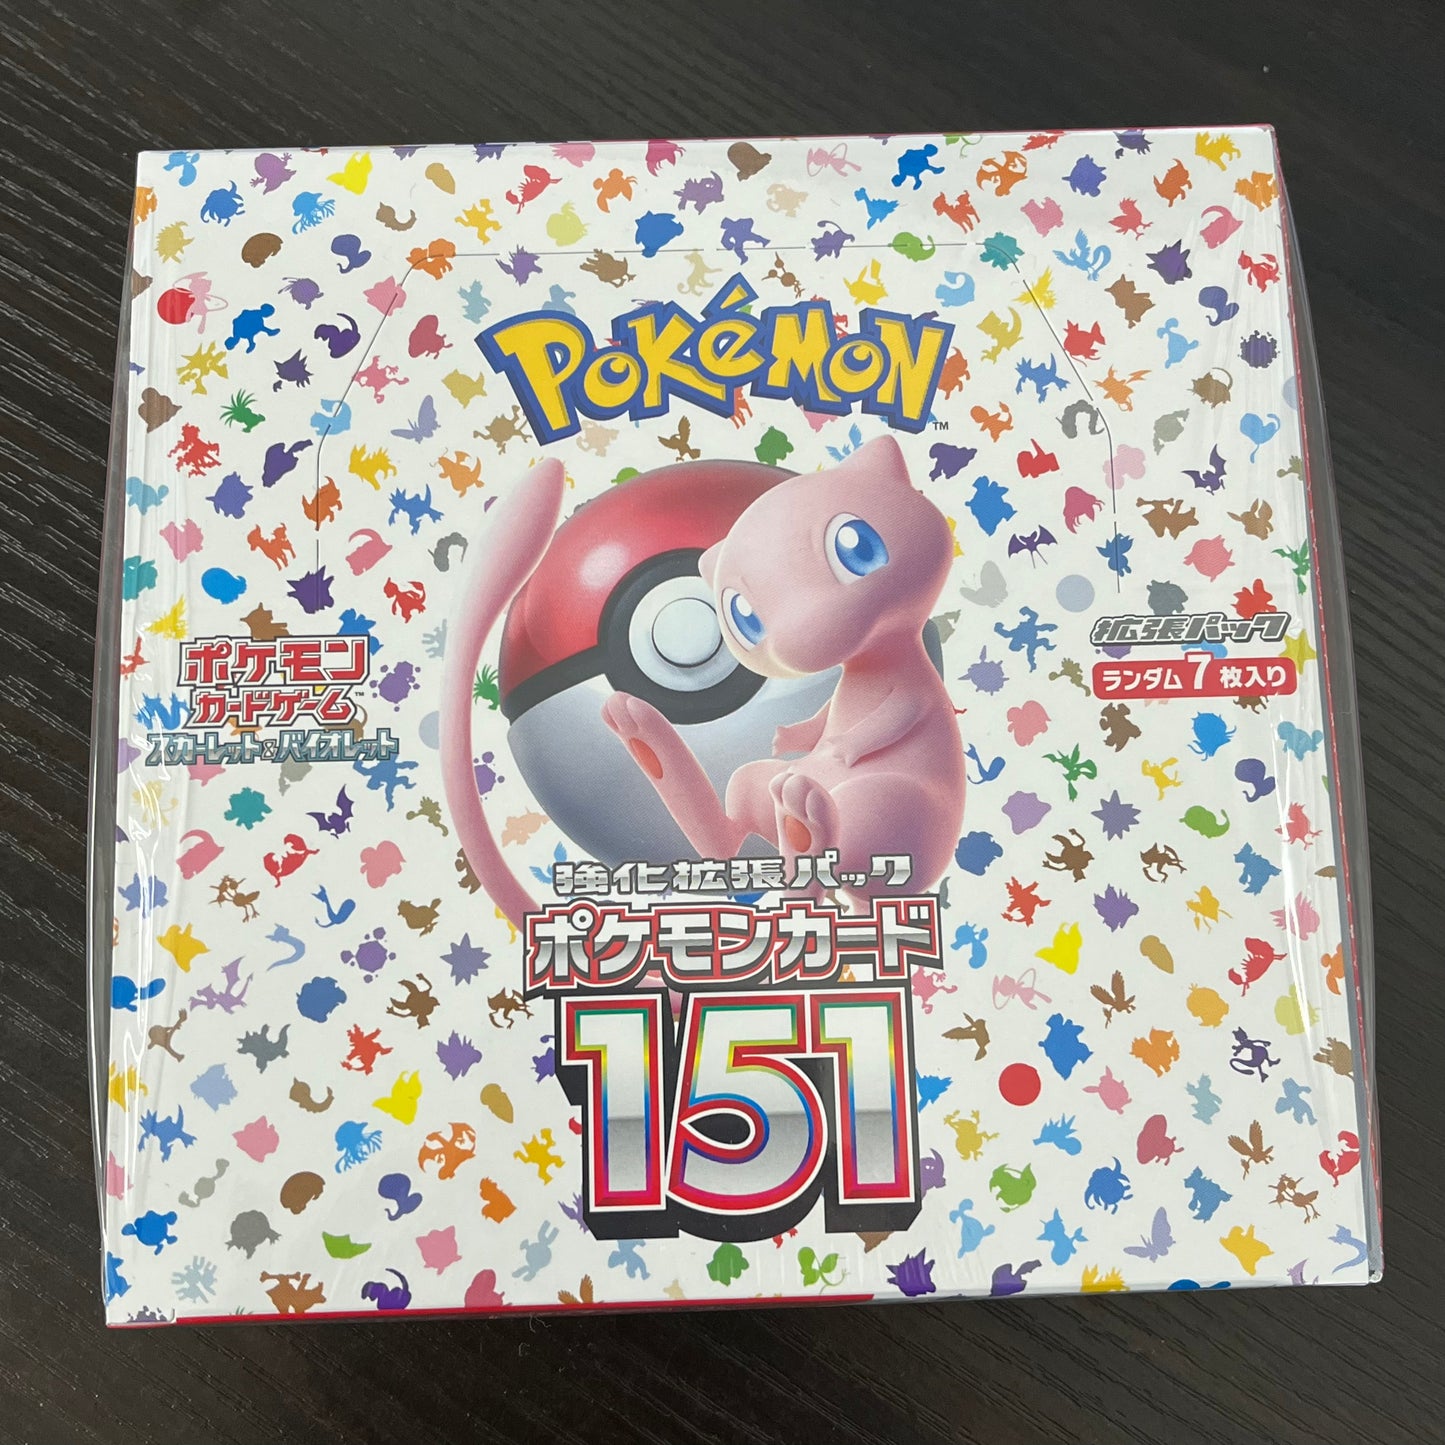 Pokemon - Scarlet & Violet - 151 - Japanese Booster Box (20 Boosters) 